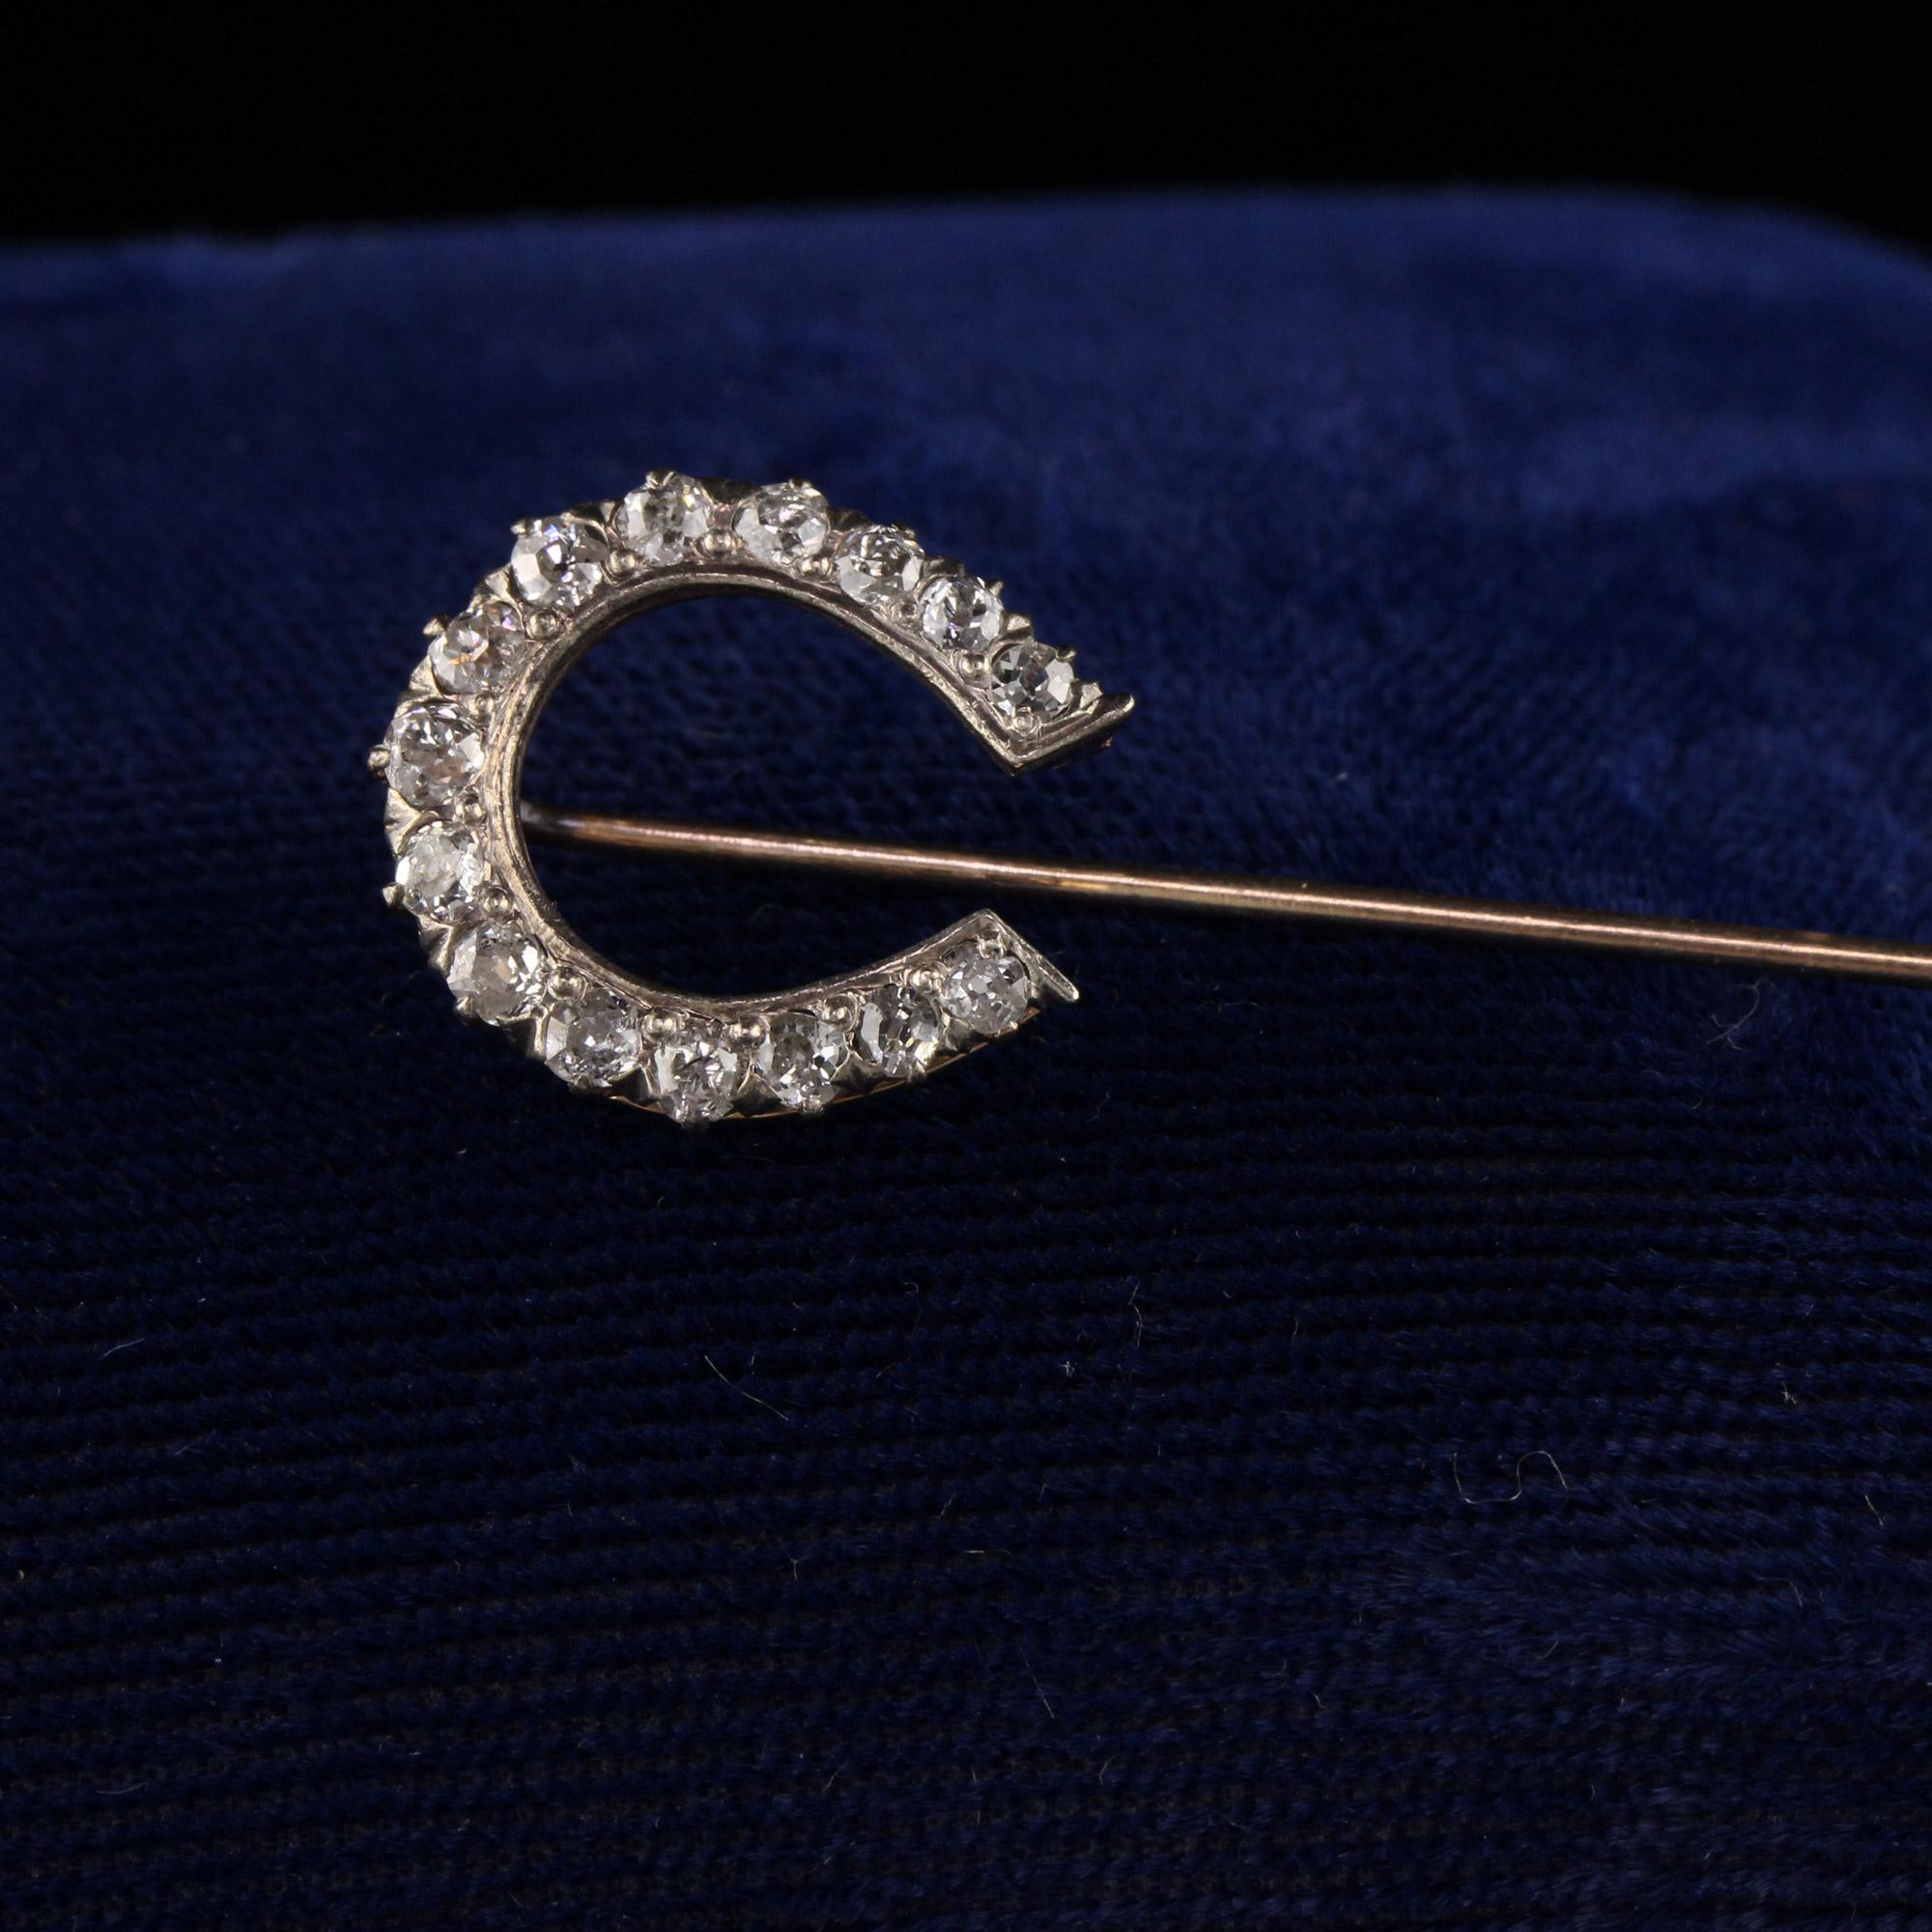 Gorgeous Victorian horse shoe pin with old mine cut diamonds.

Item #P0095

Metal: 14K Yellow Gold

Weight: 2.8 Grams

Total Diamond Weight: Approximately 0.85 cts

Diamond Color: H

Diamond Clarity: SI1

Measurements: 2.5 in x 7.4 mm 